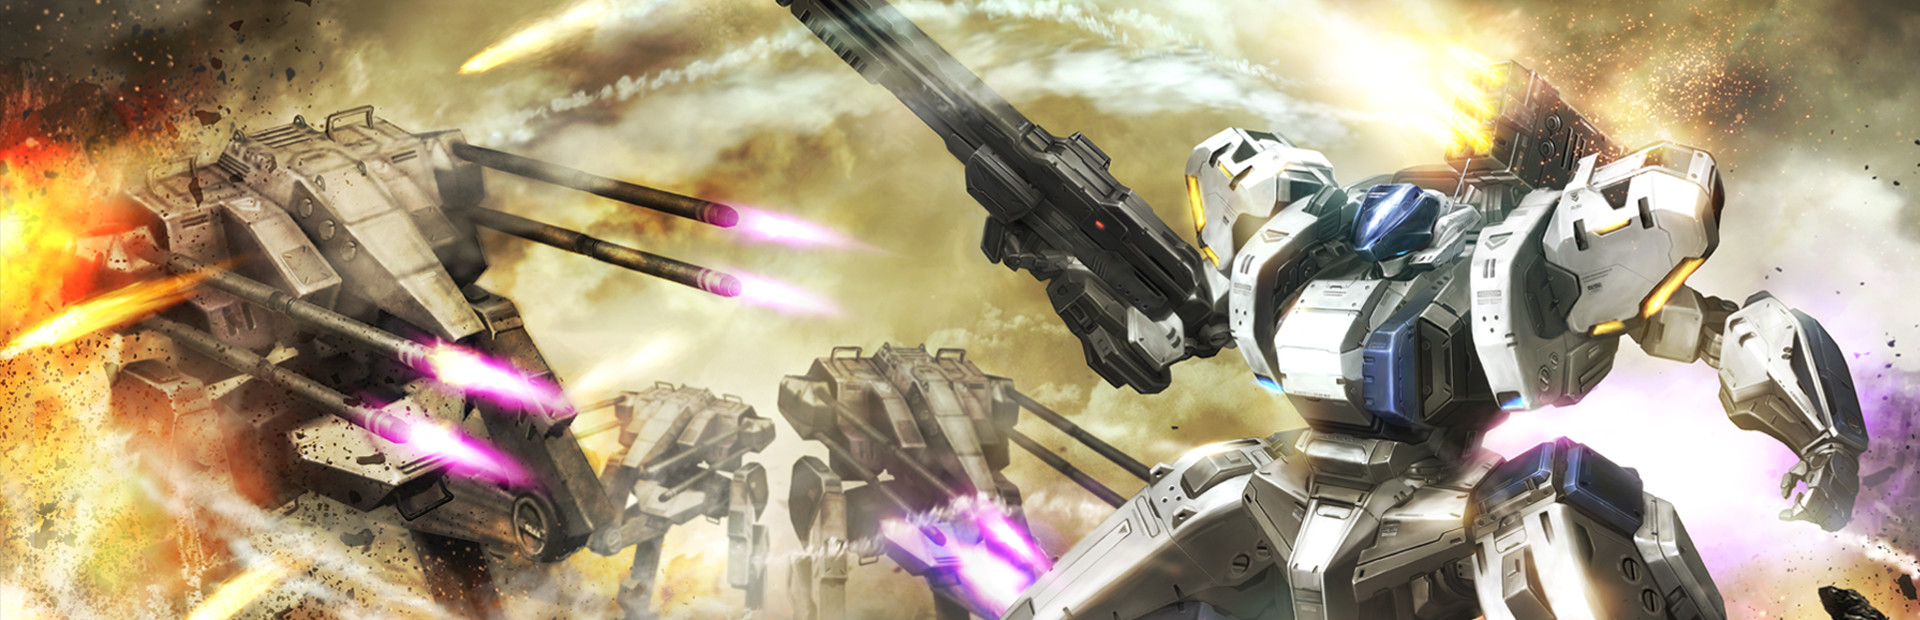 ASSAULT GUNNERS HD EDITION cover image